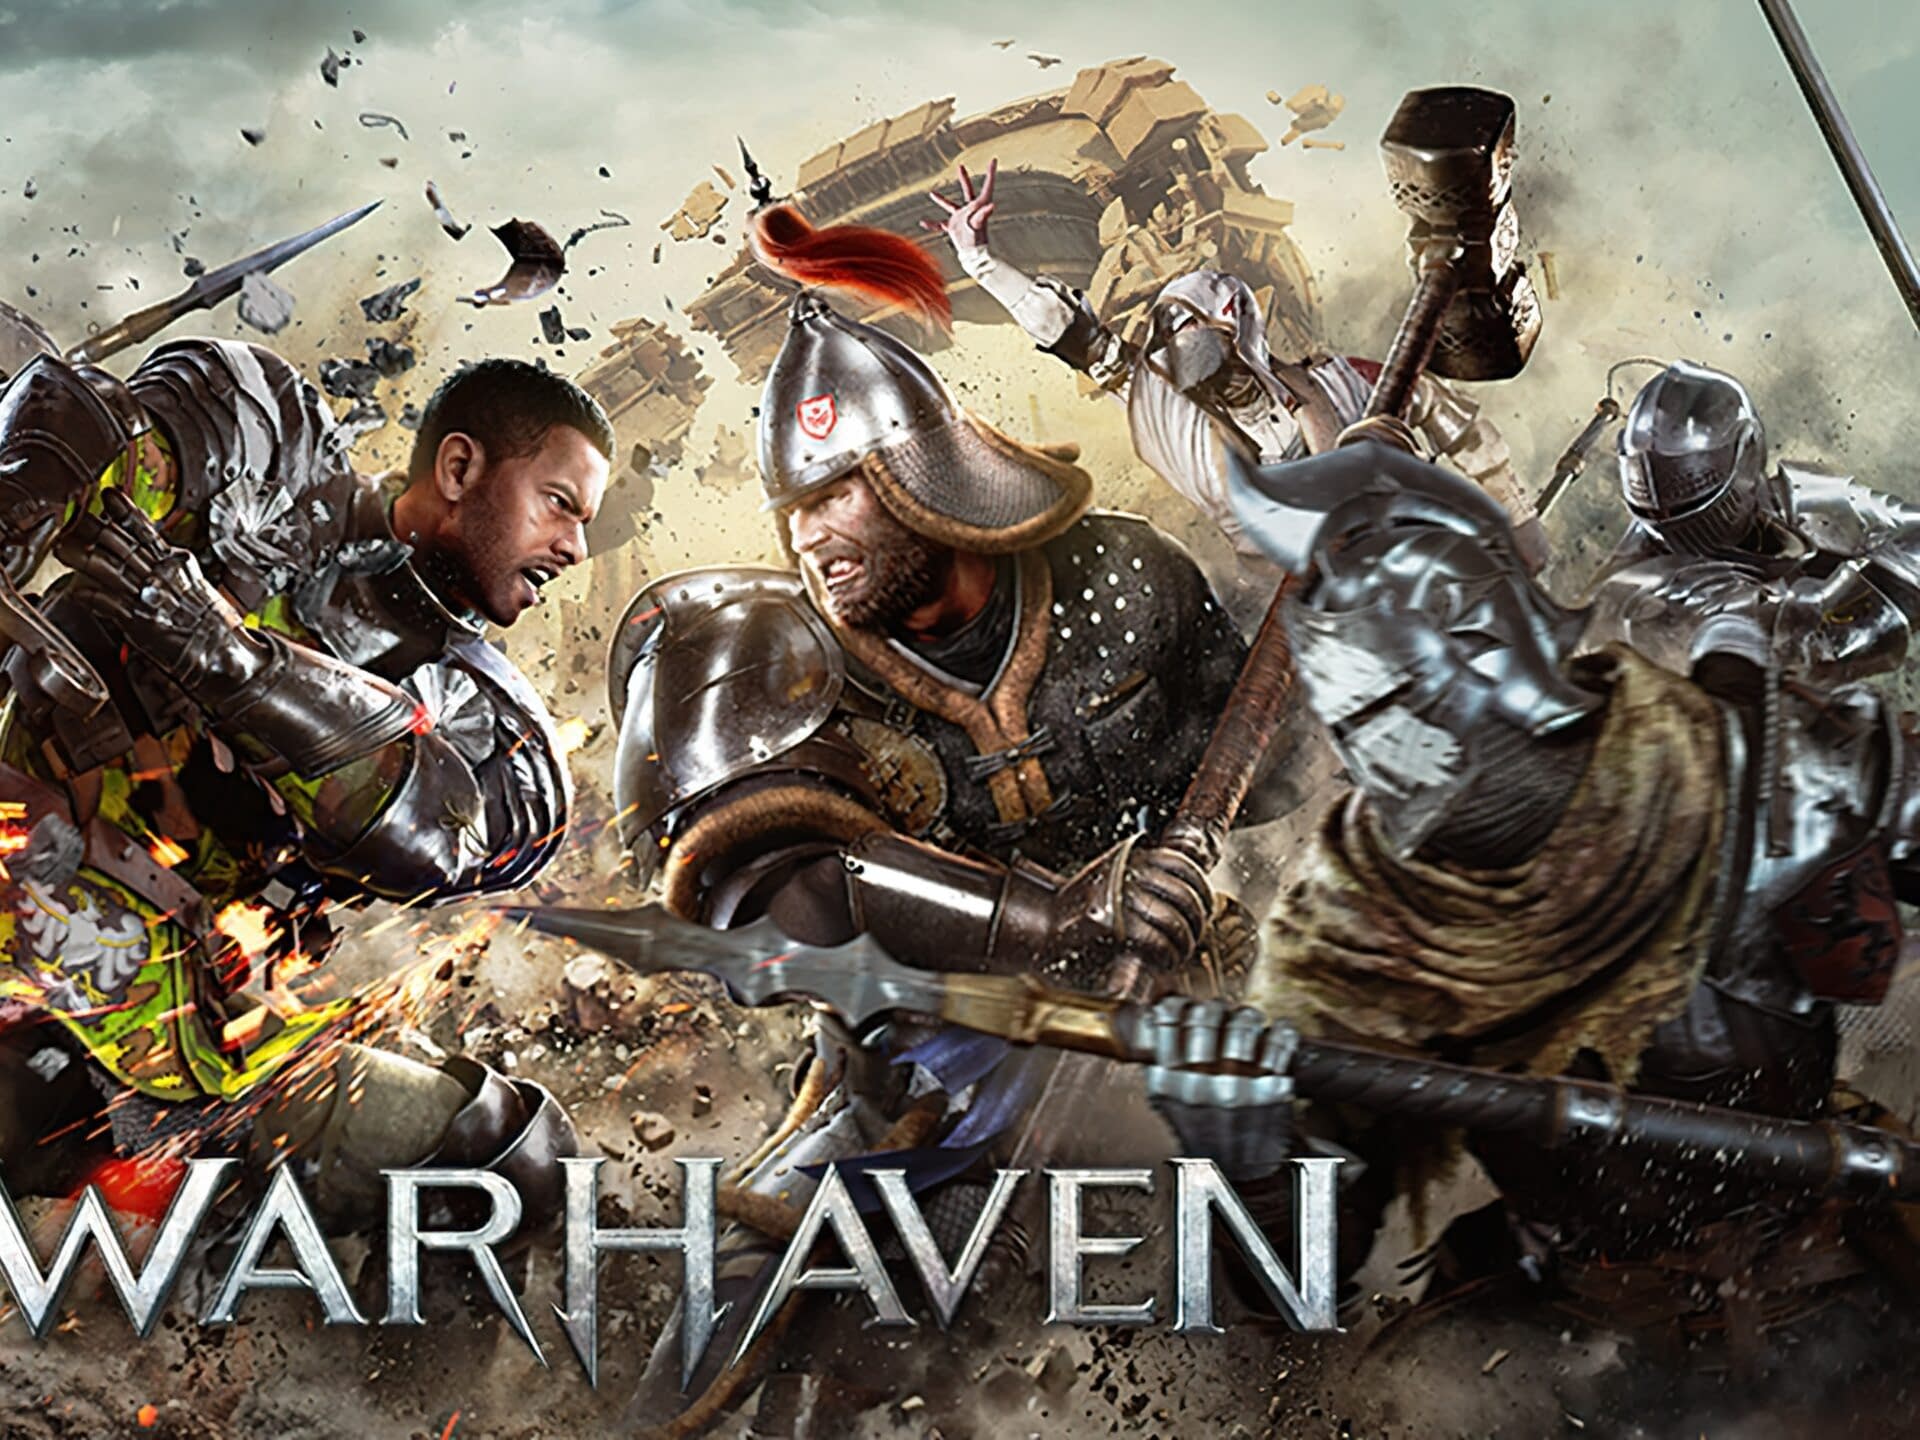 Warhaven Comes to Playstation 5 and Xbox Series Consoles